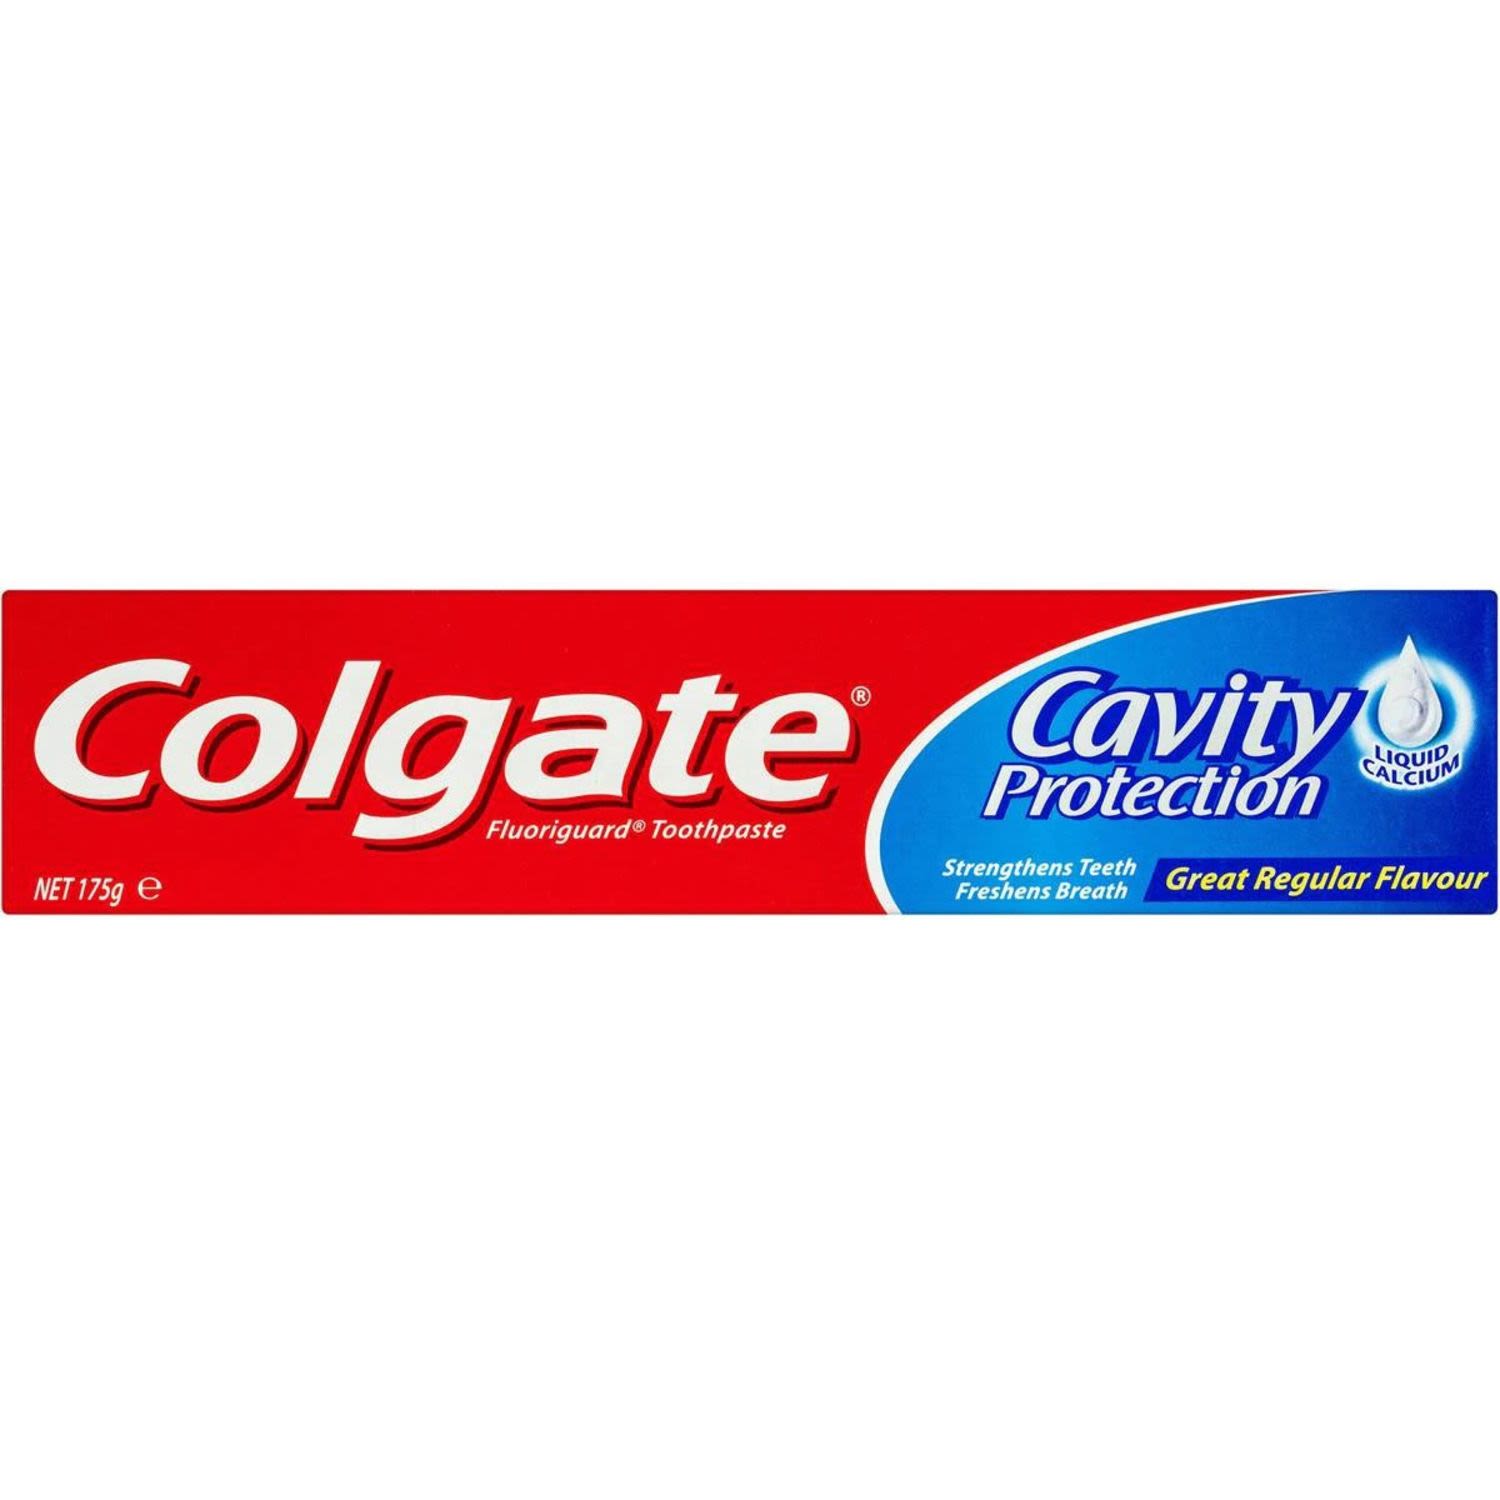 Colgate Cavity Protection Great Regular Flavour Toothpaste, 175 Gram